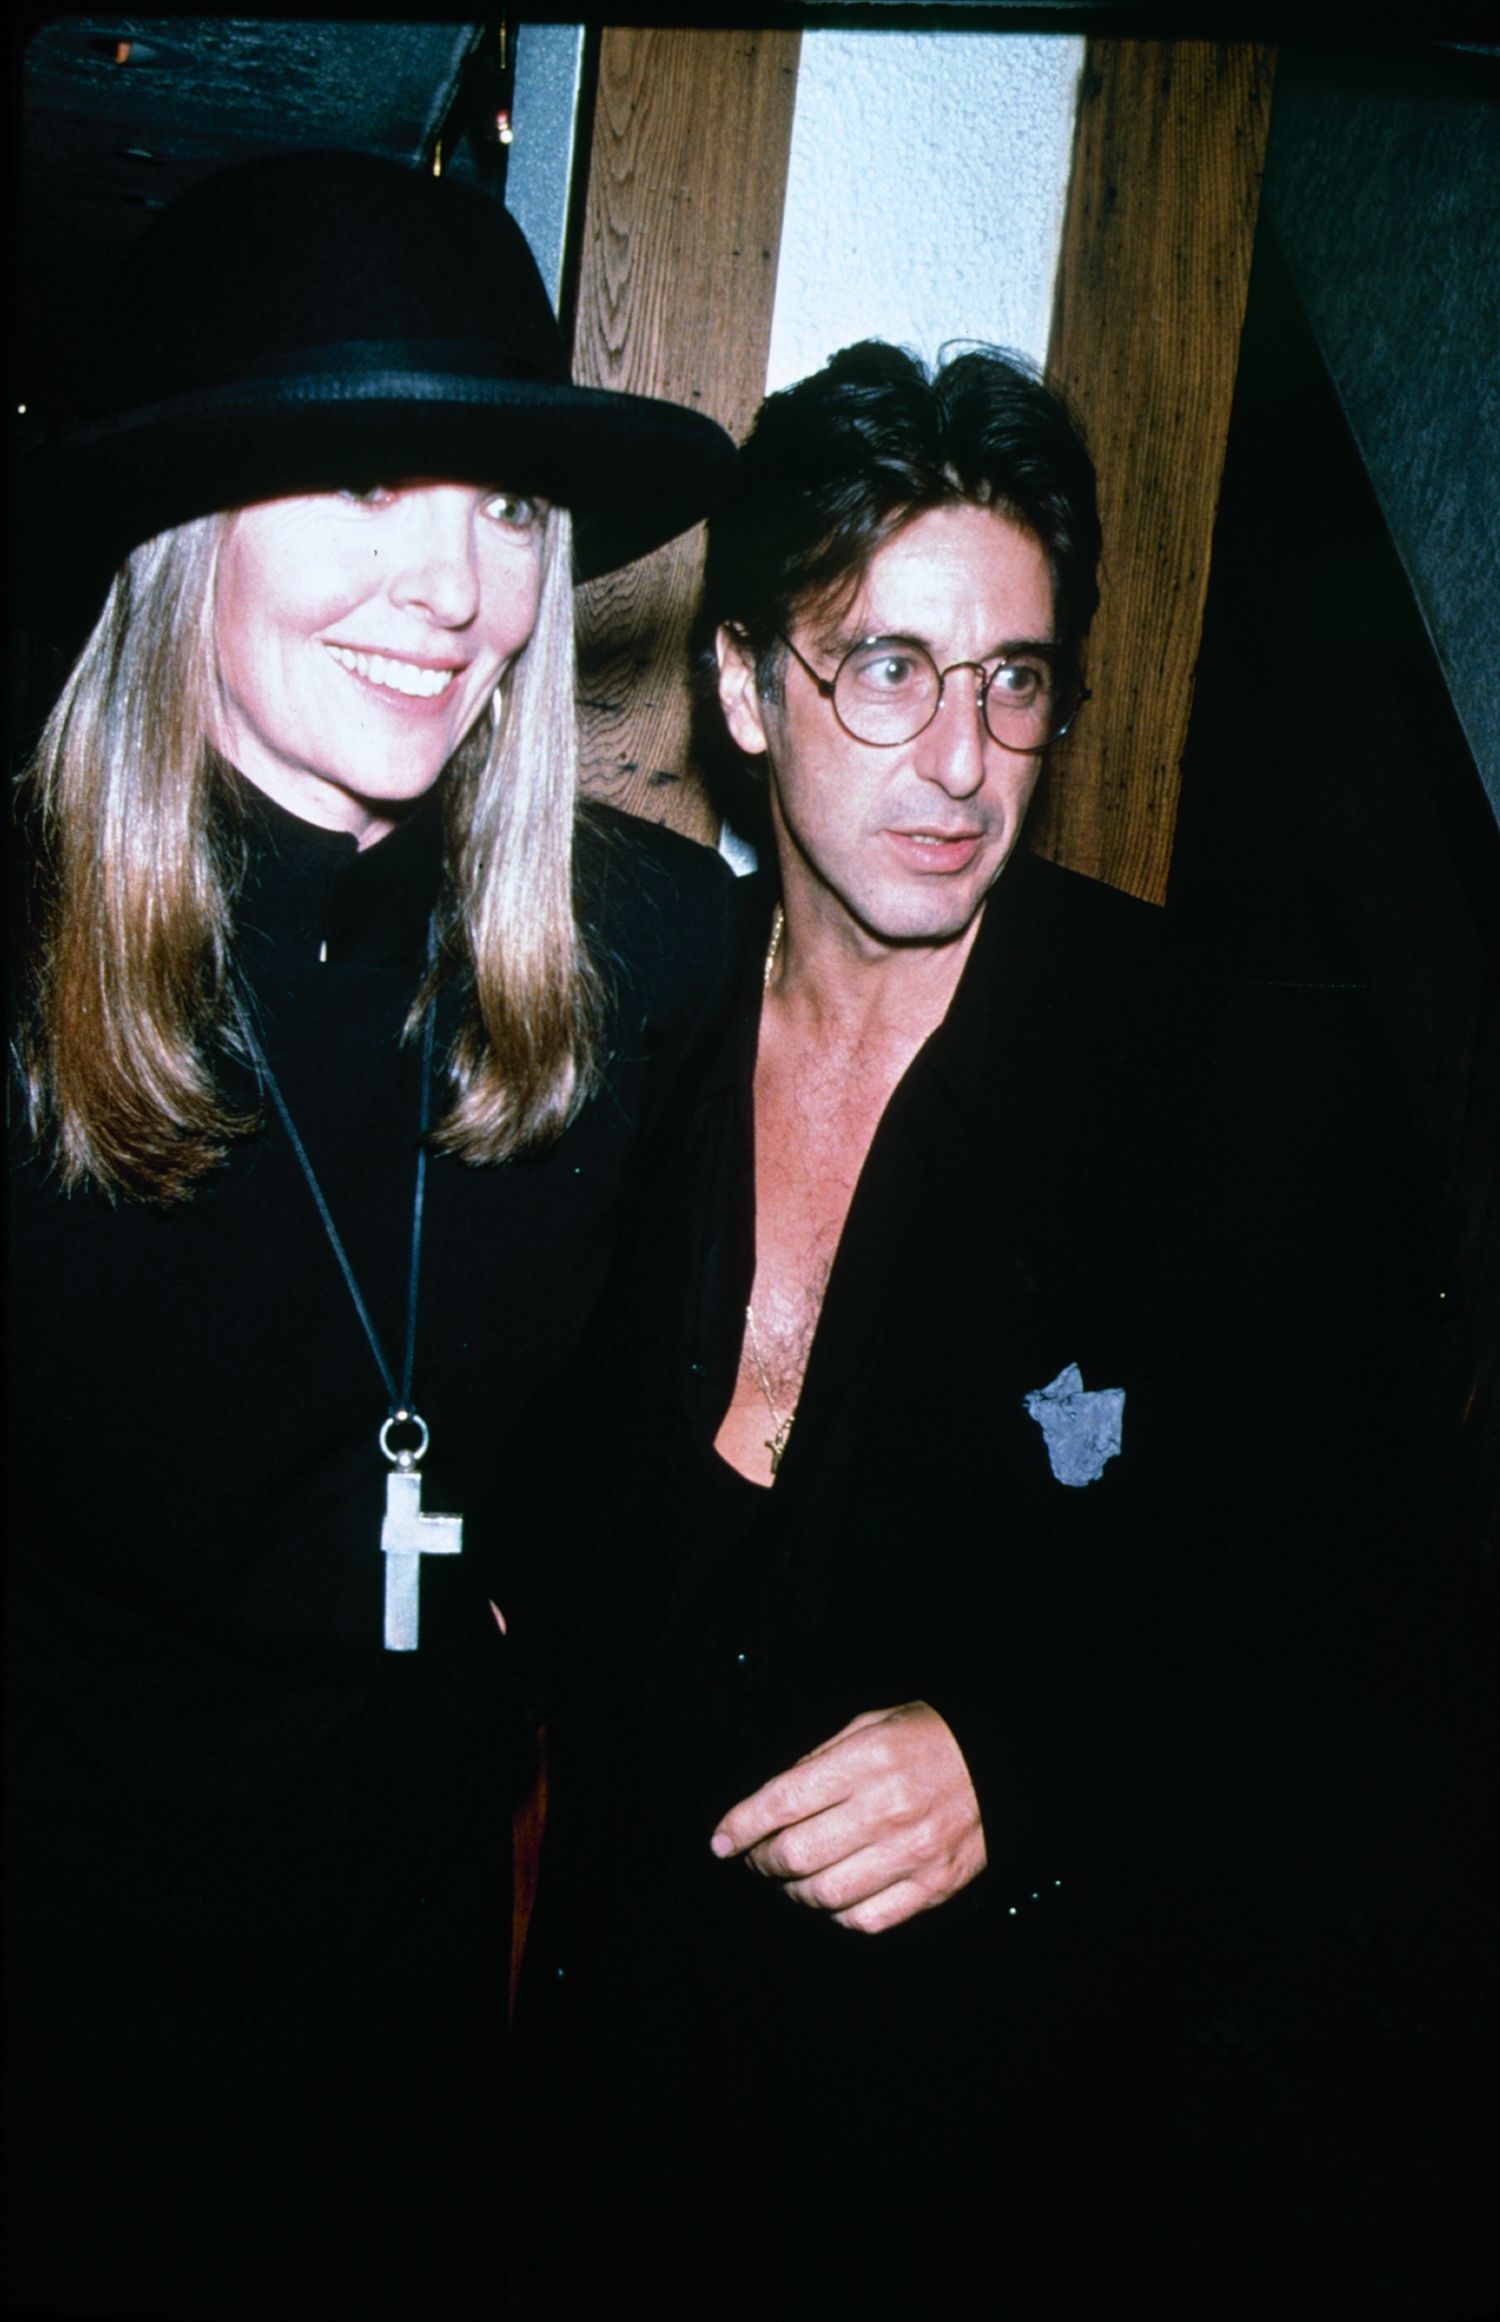 Diane Keaton and Al Pacino at the premiere of "Sea of Love" on September 12, 1989, in New York City. | Source: The LIFE Picture Collection/Getty Images